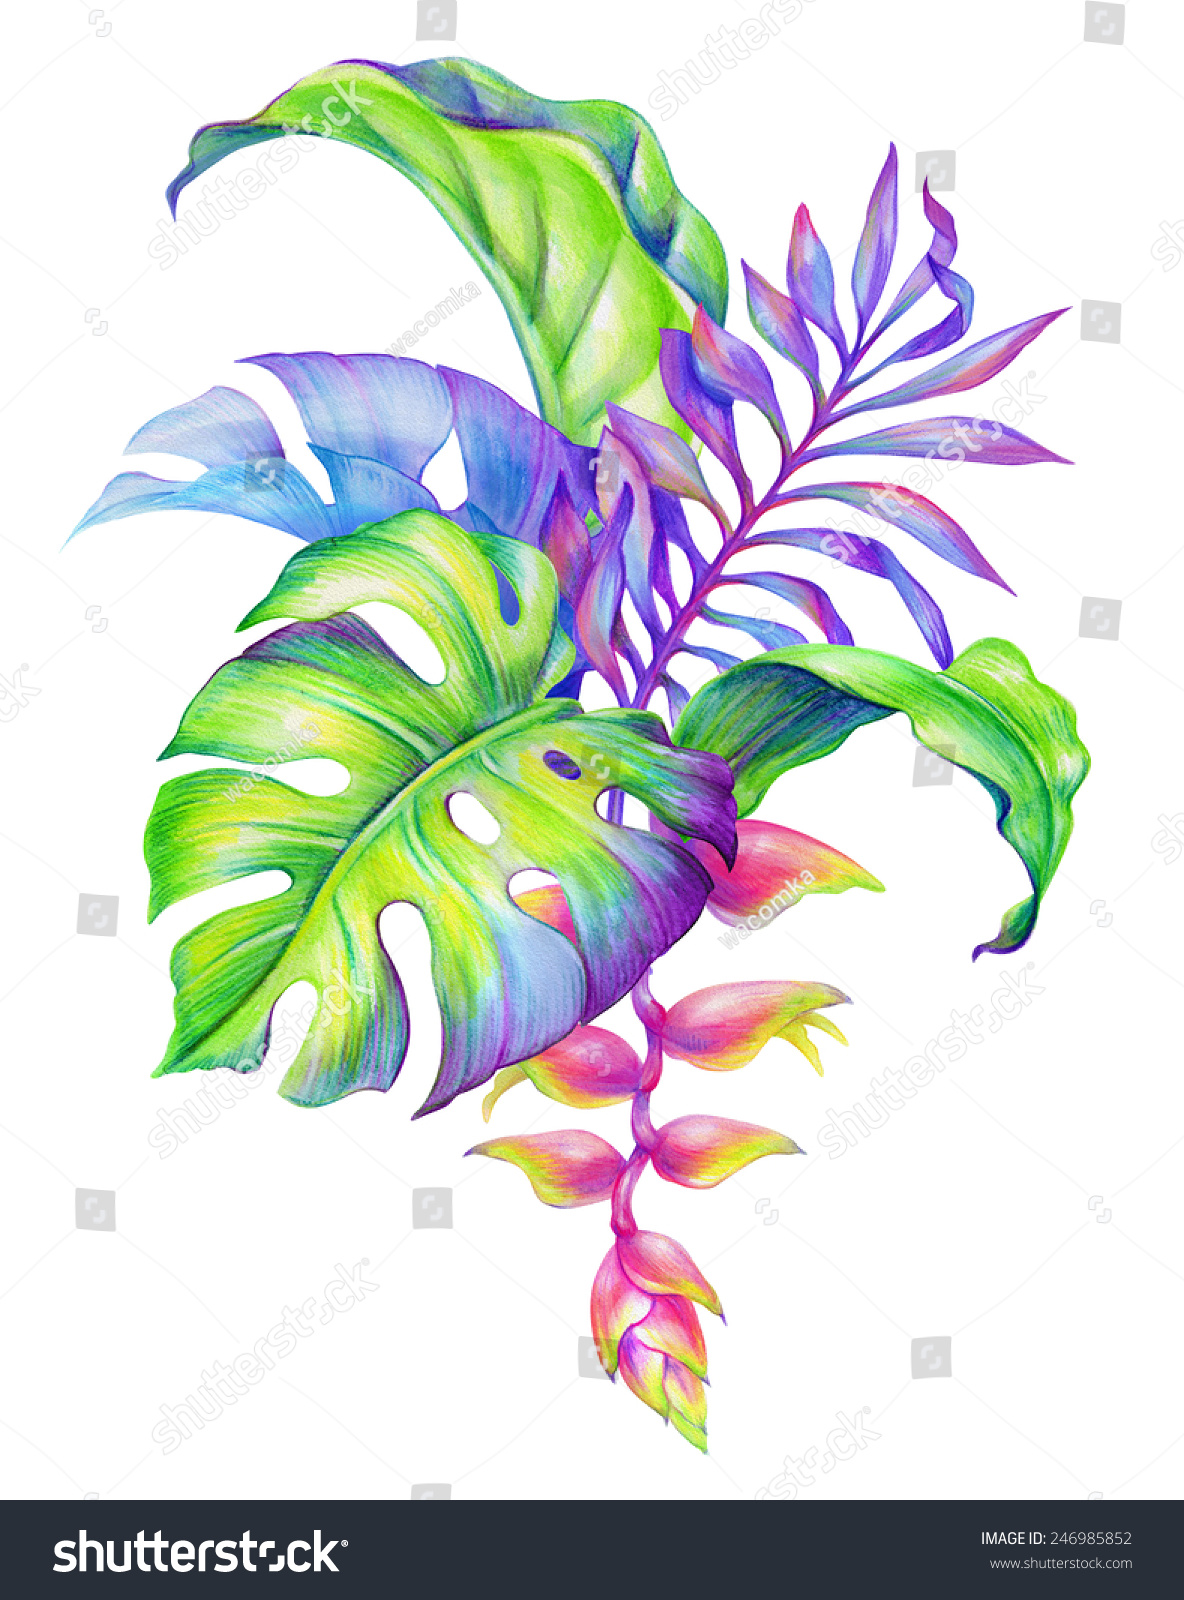 Abstract Tropical Leaves Flowers Jungle Plants Stock ...